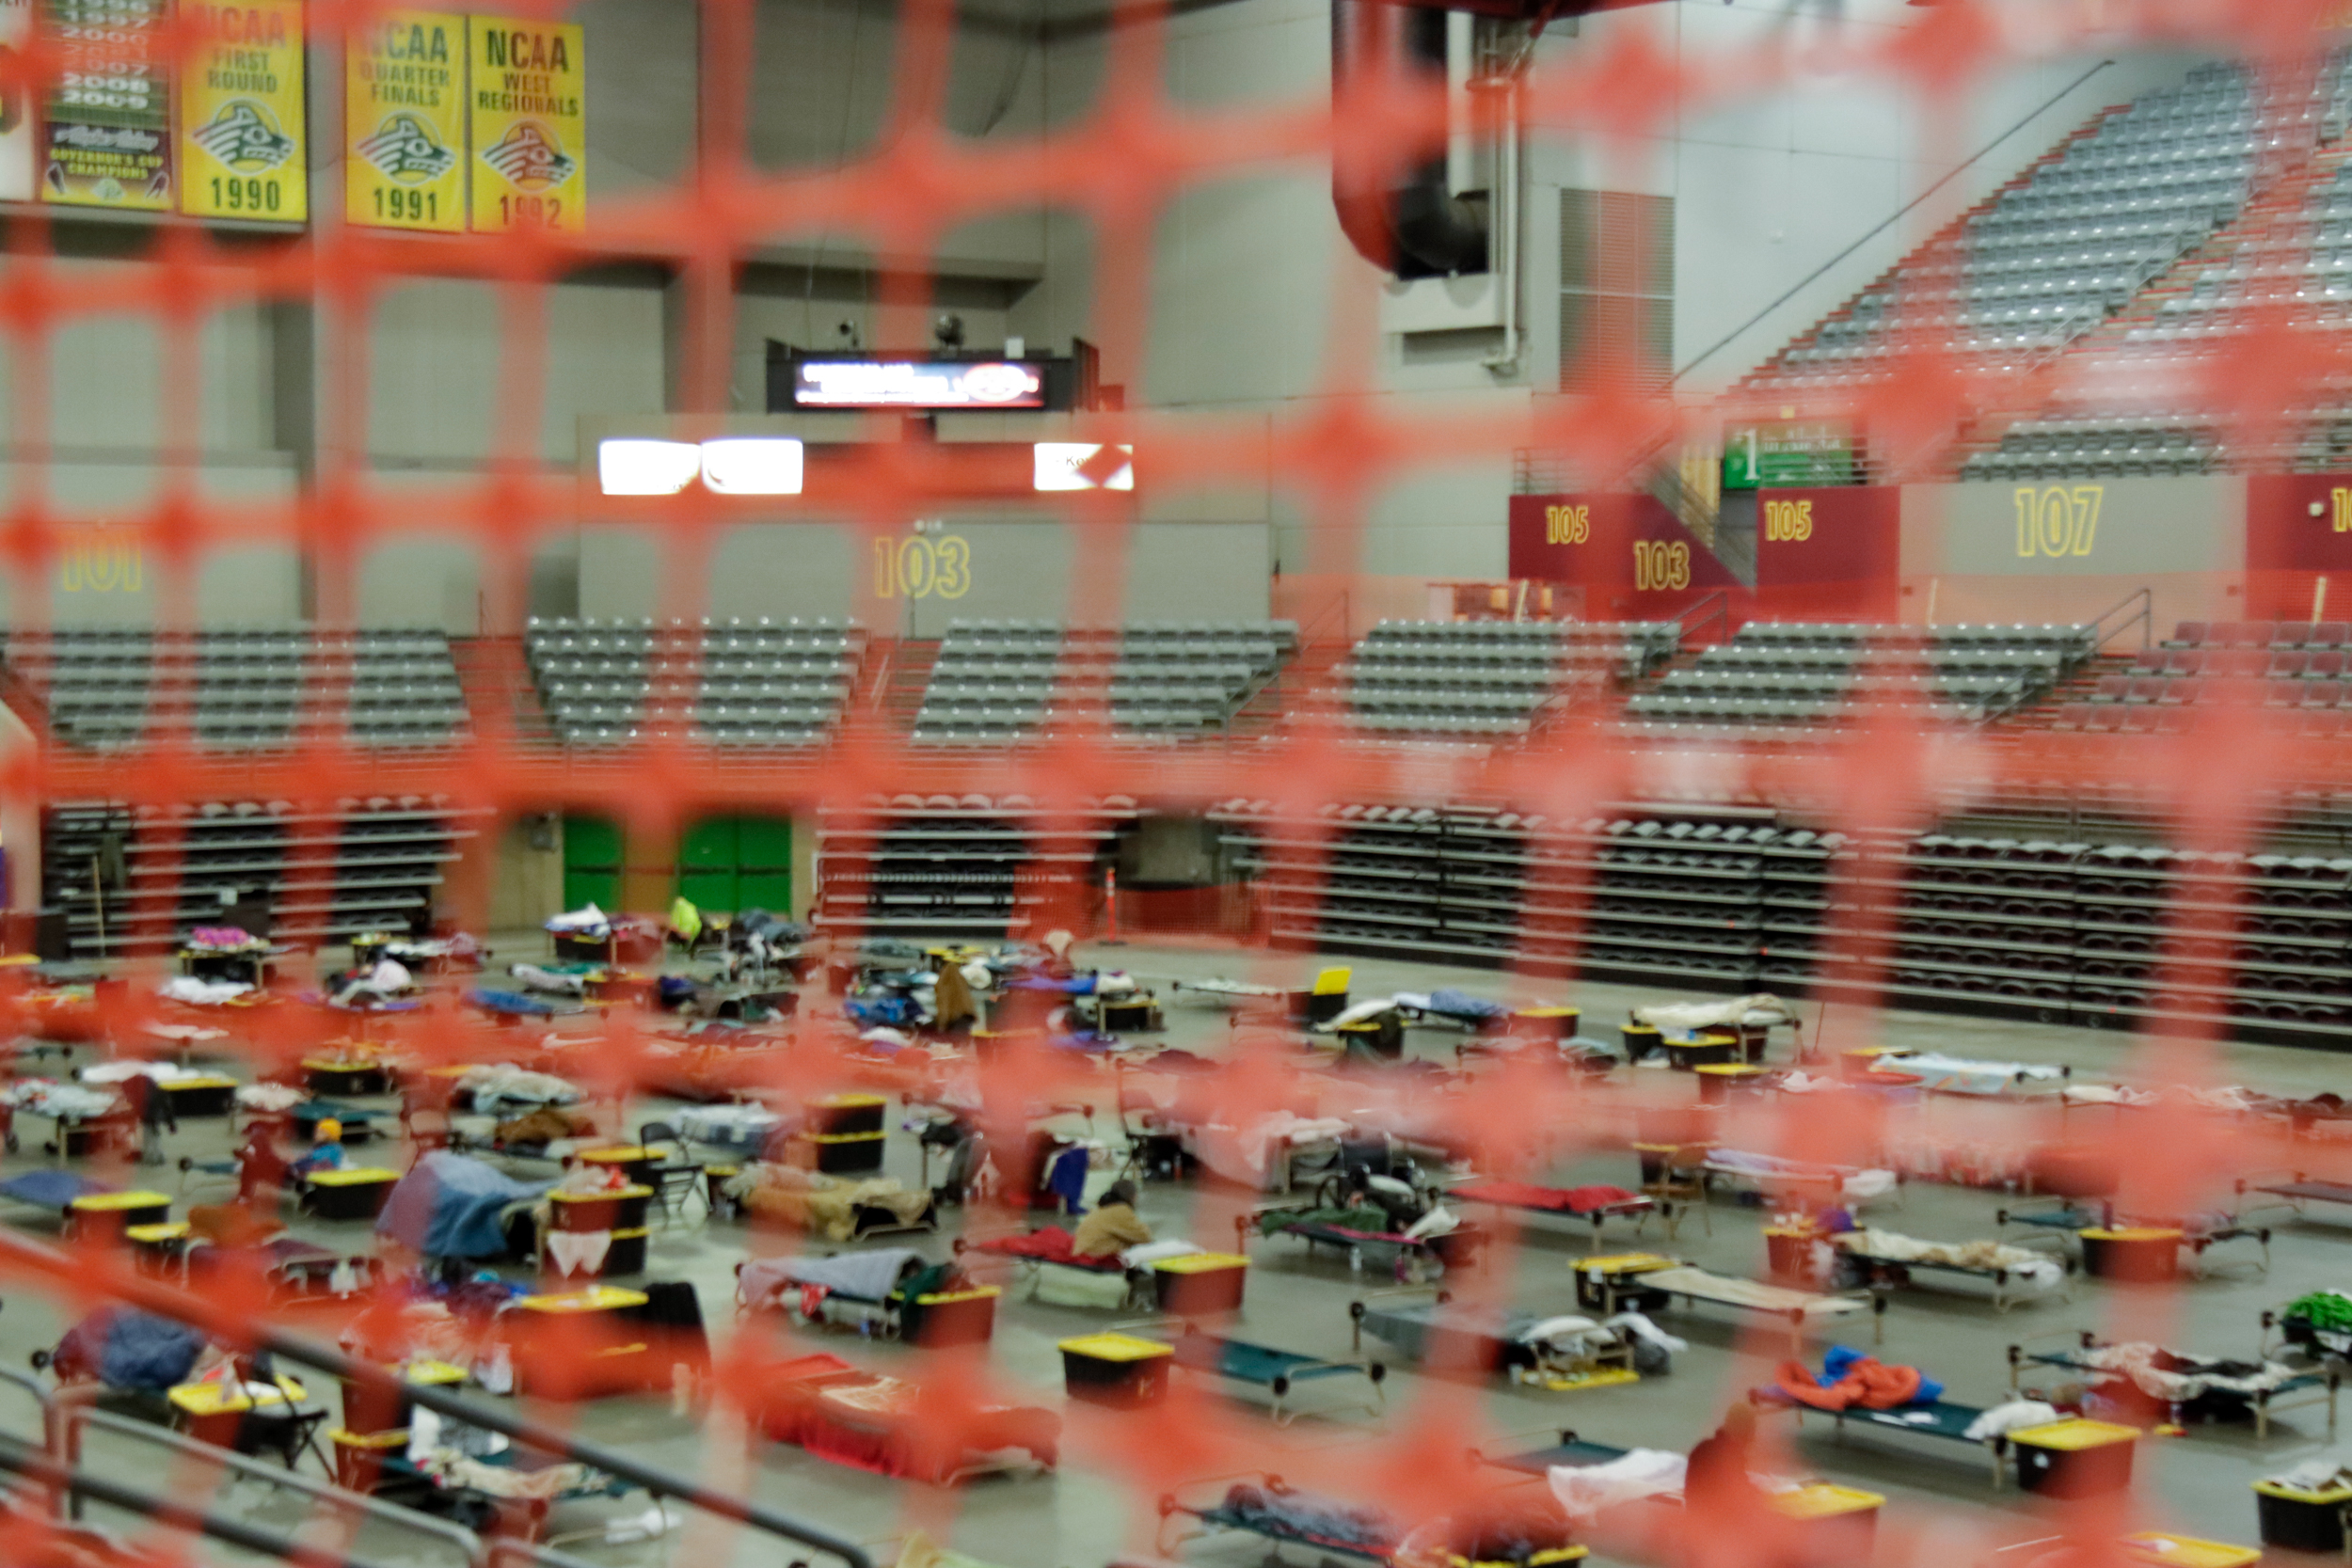 Cots and totes are organized on the floor of an arena.